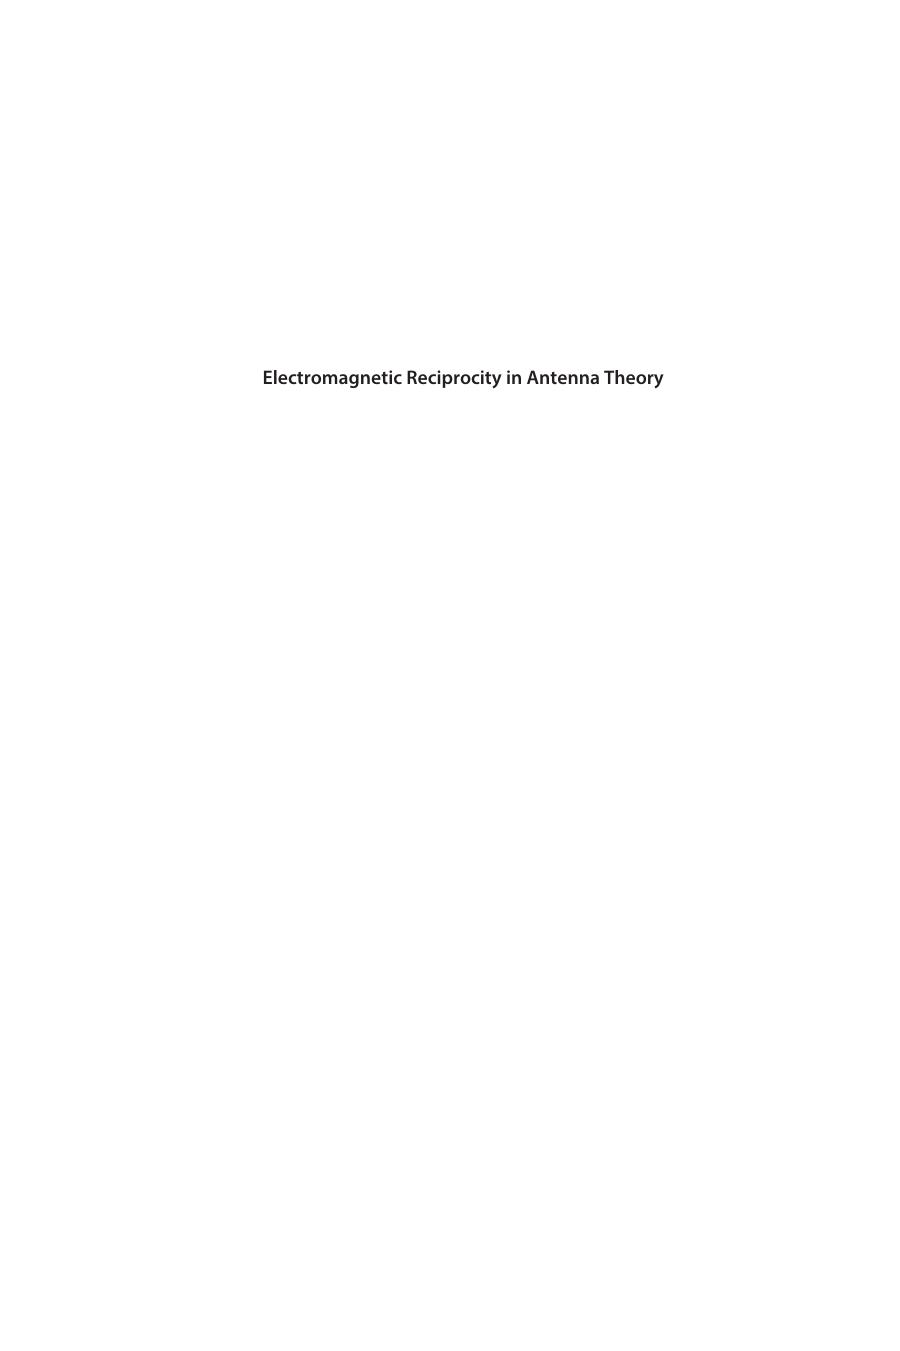 Electromagnetic Reciprocity in Antenna Theory 2018( PDFDrive.com )